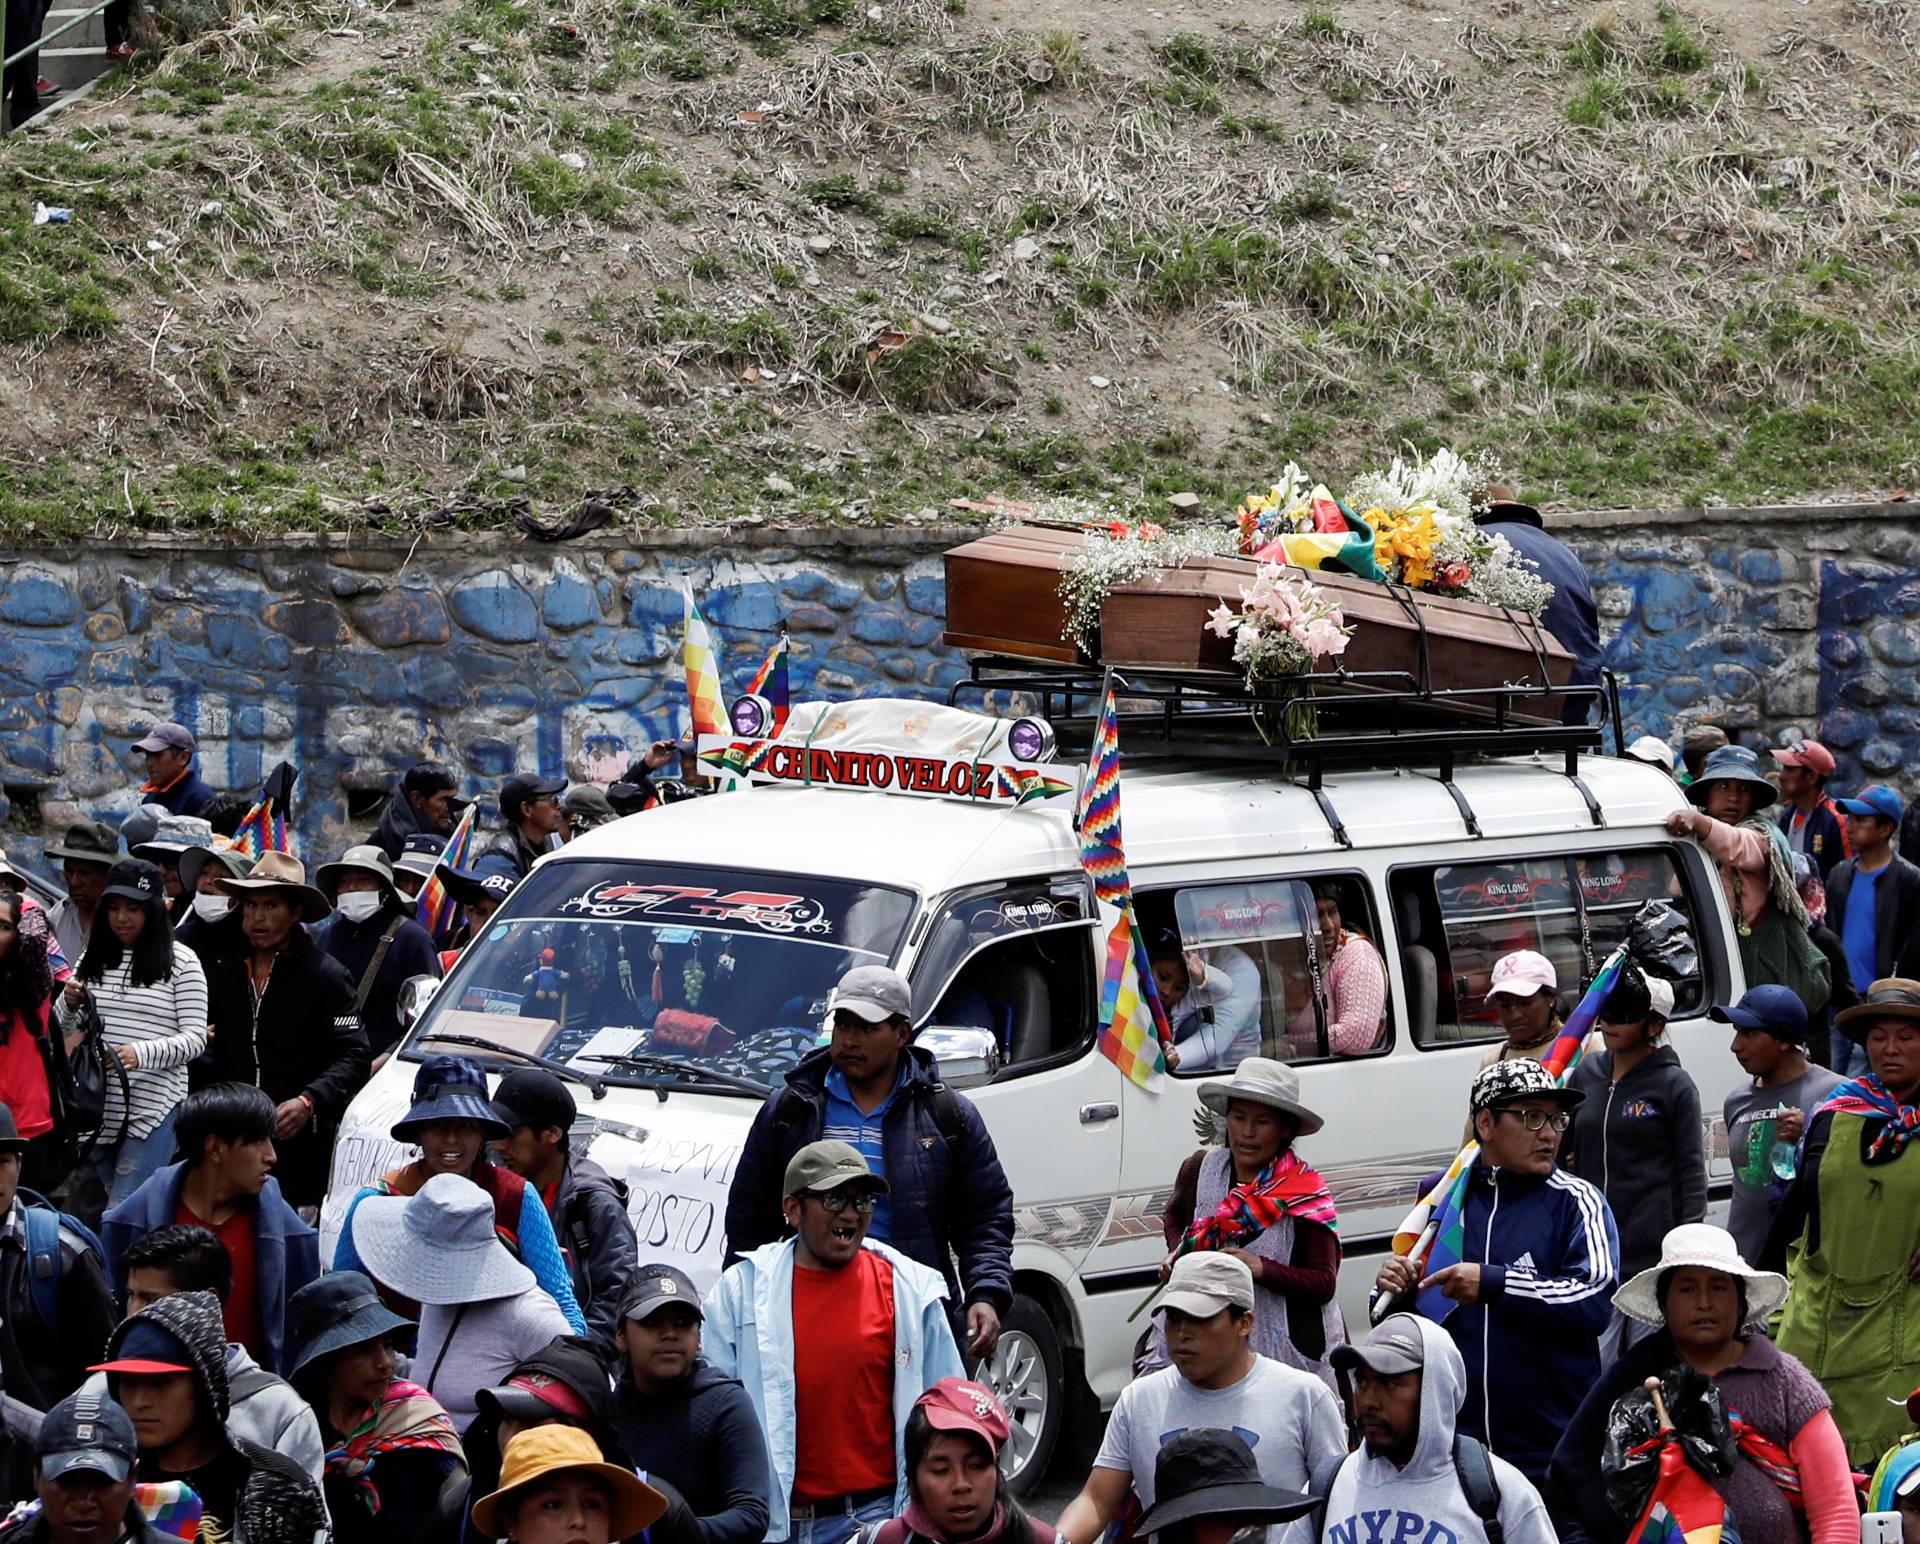 Supporters of former Bolivian President Evo Morales take part in a protest, in La Paz